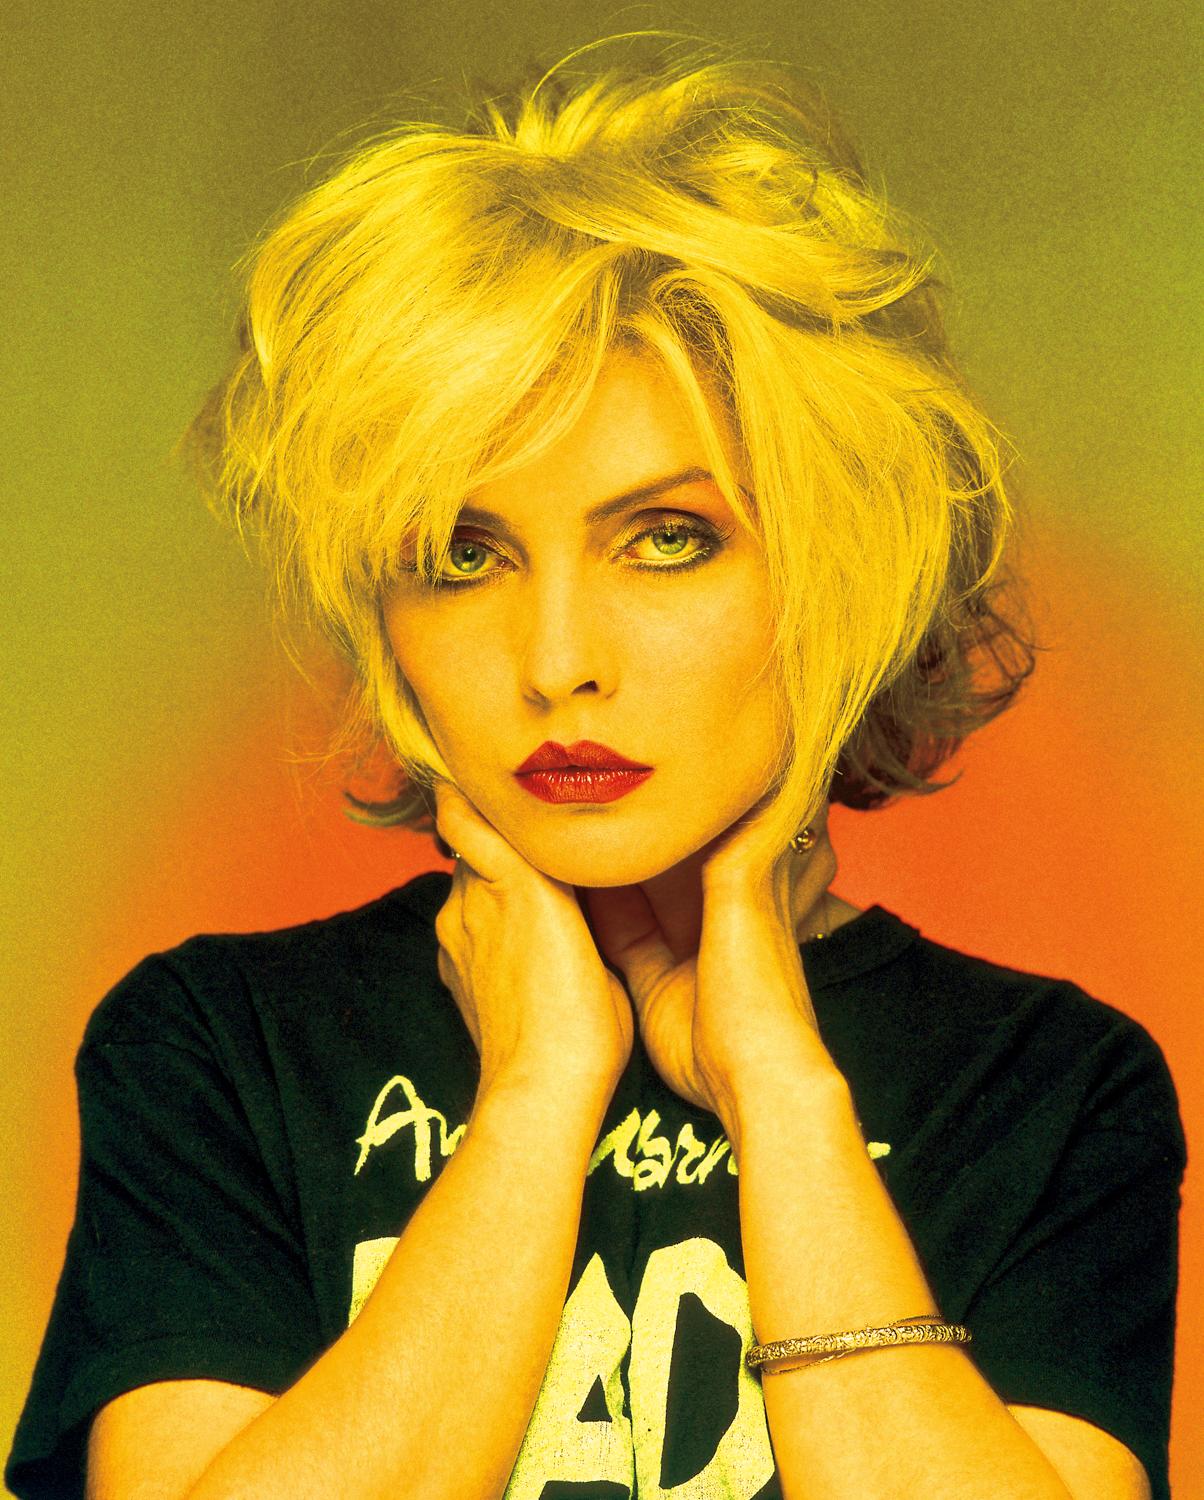 Signed limited edition 16x20" print of Debbie Harry, lead singer of US band Blondie, photographed in London in 1978 by Brian Aris. Limited edition number

Brian Aris limited edition prints, signed and numbered by Brian and carrying his embossed